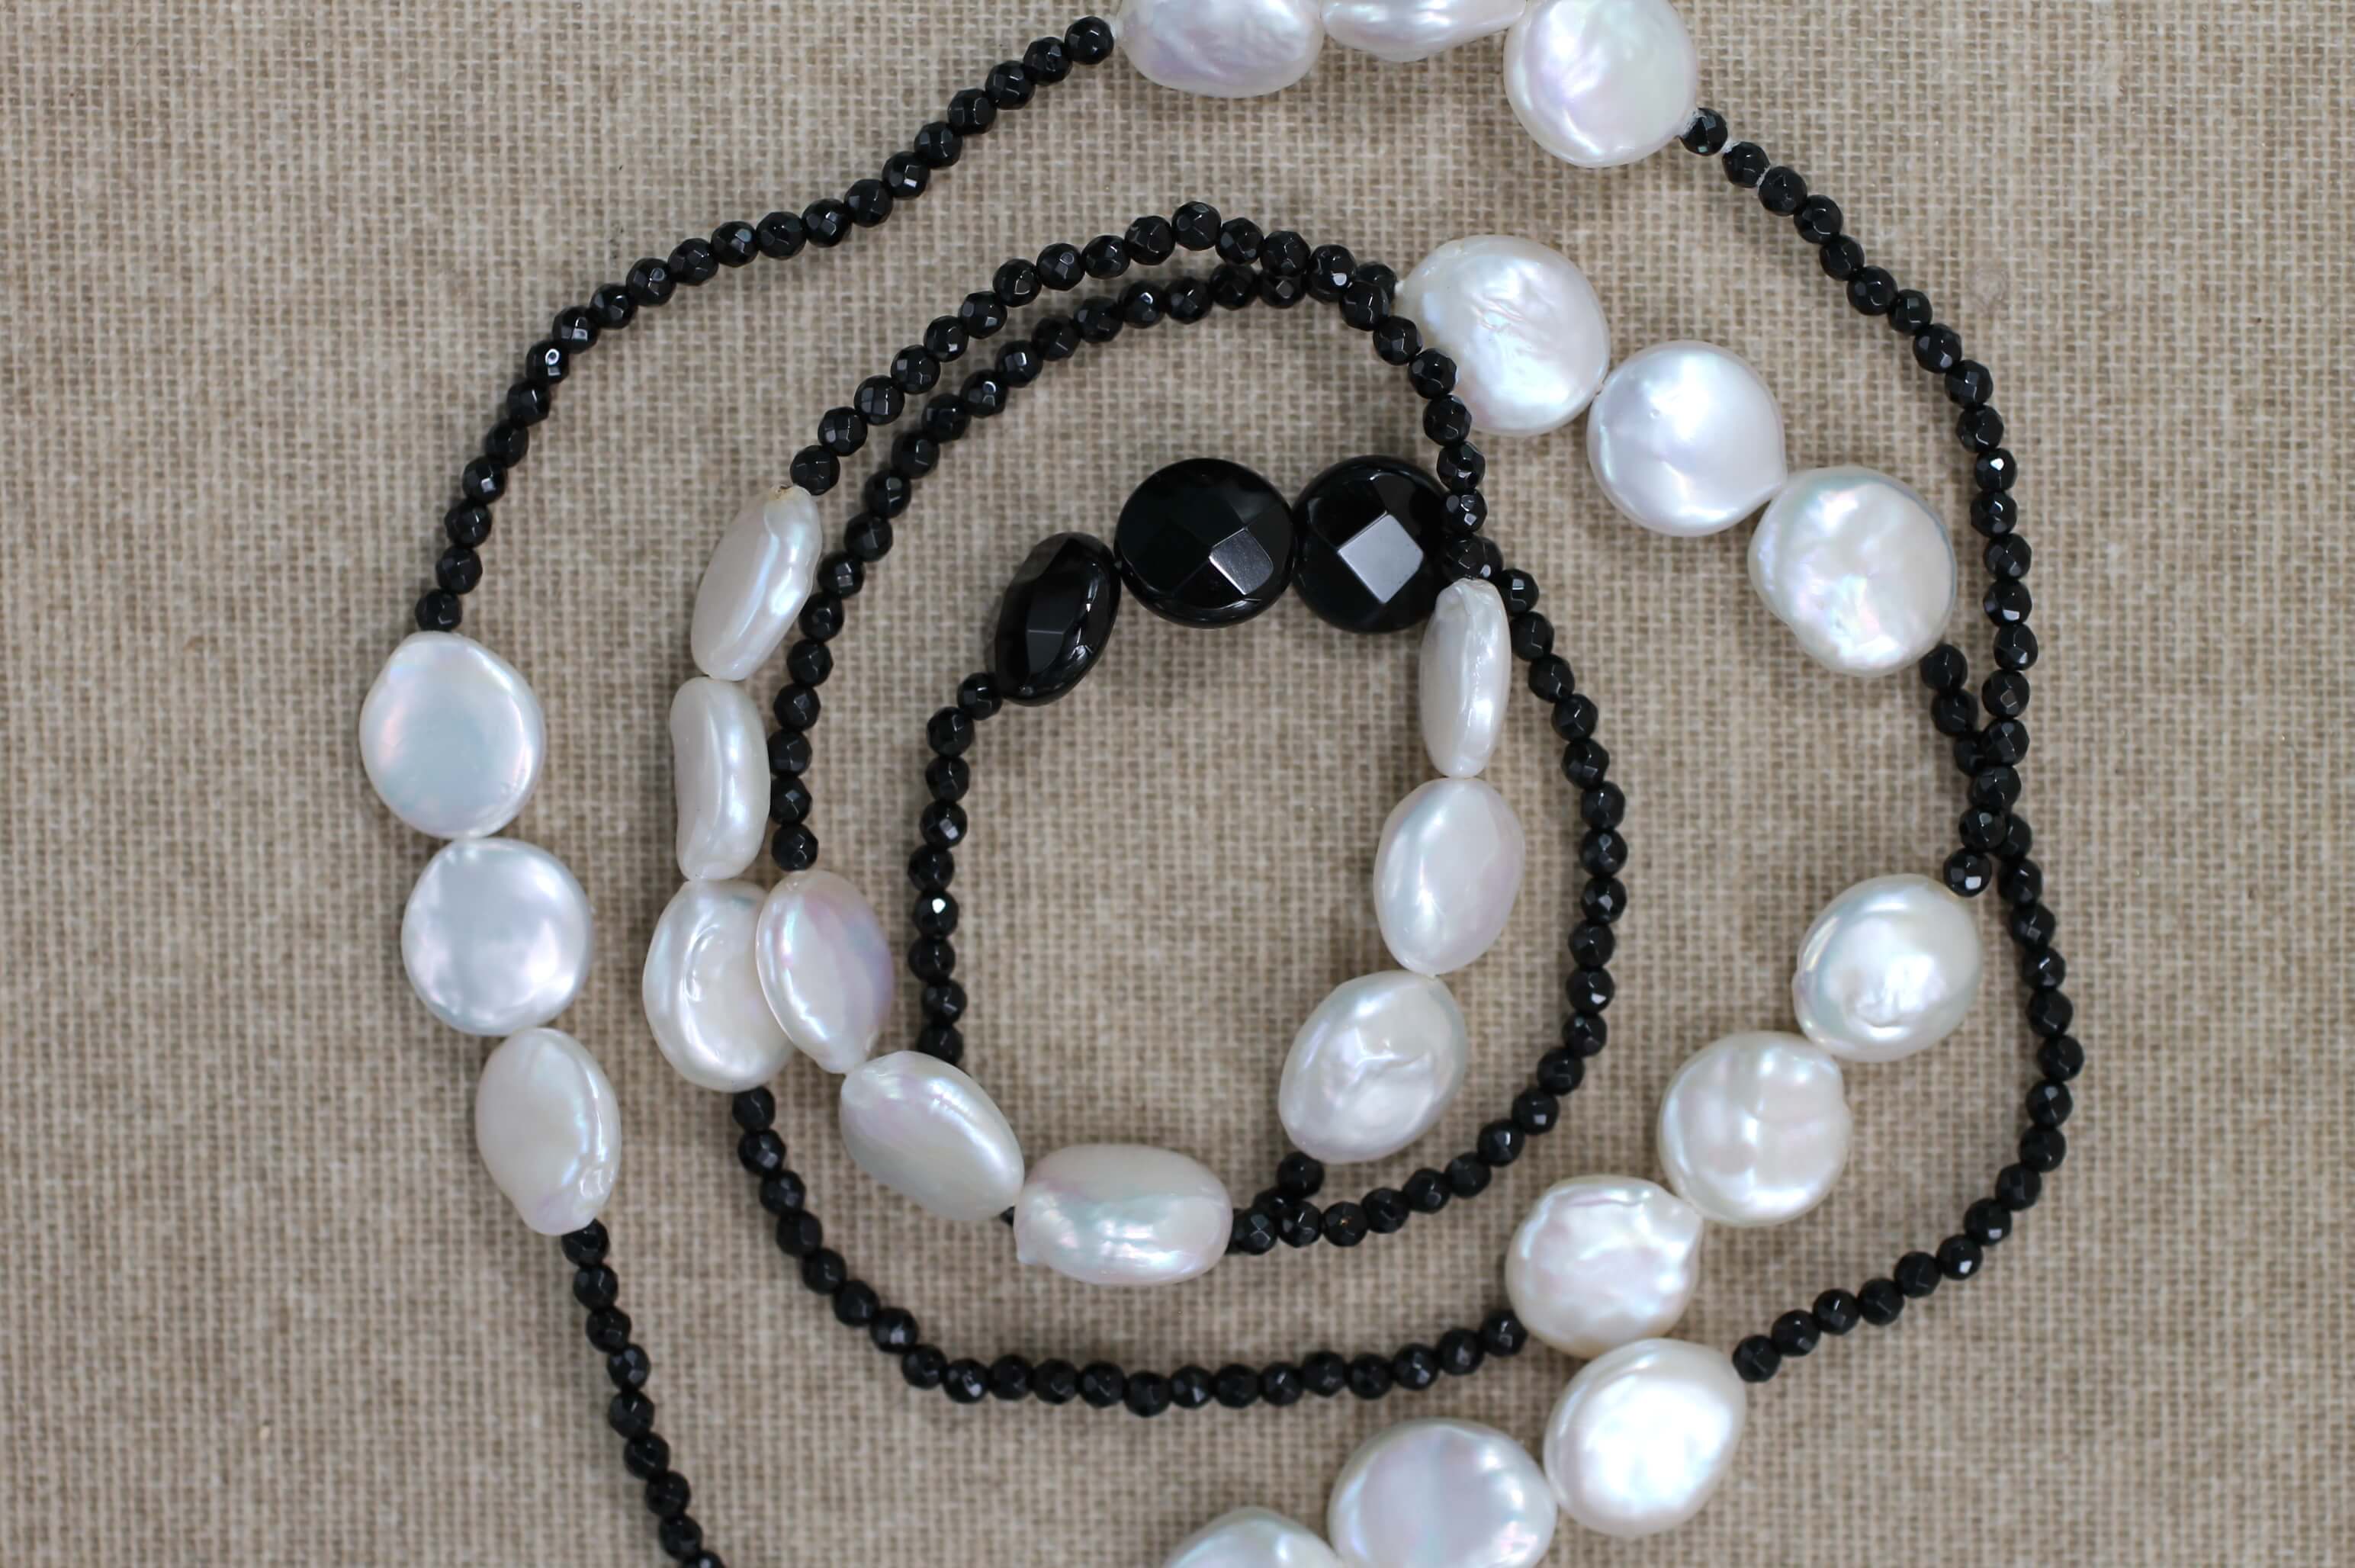 Faceted Onyx and Baroque Pearls necklace.